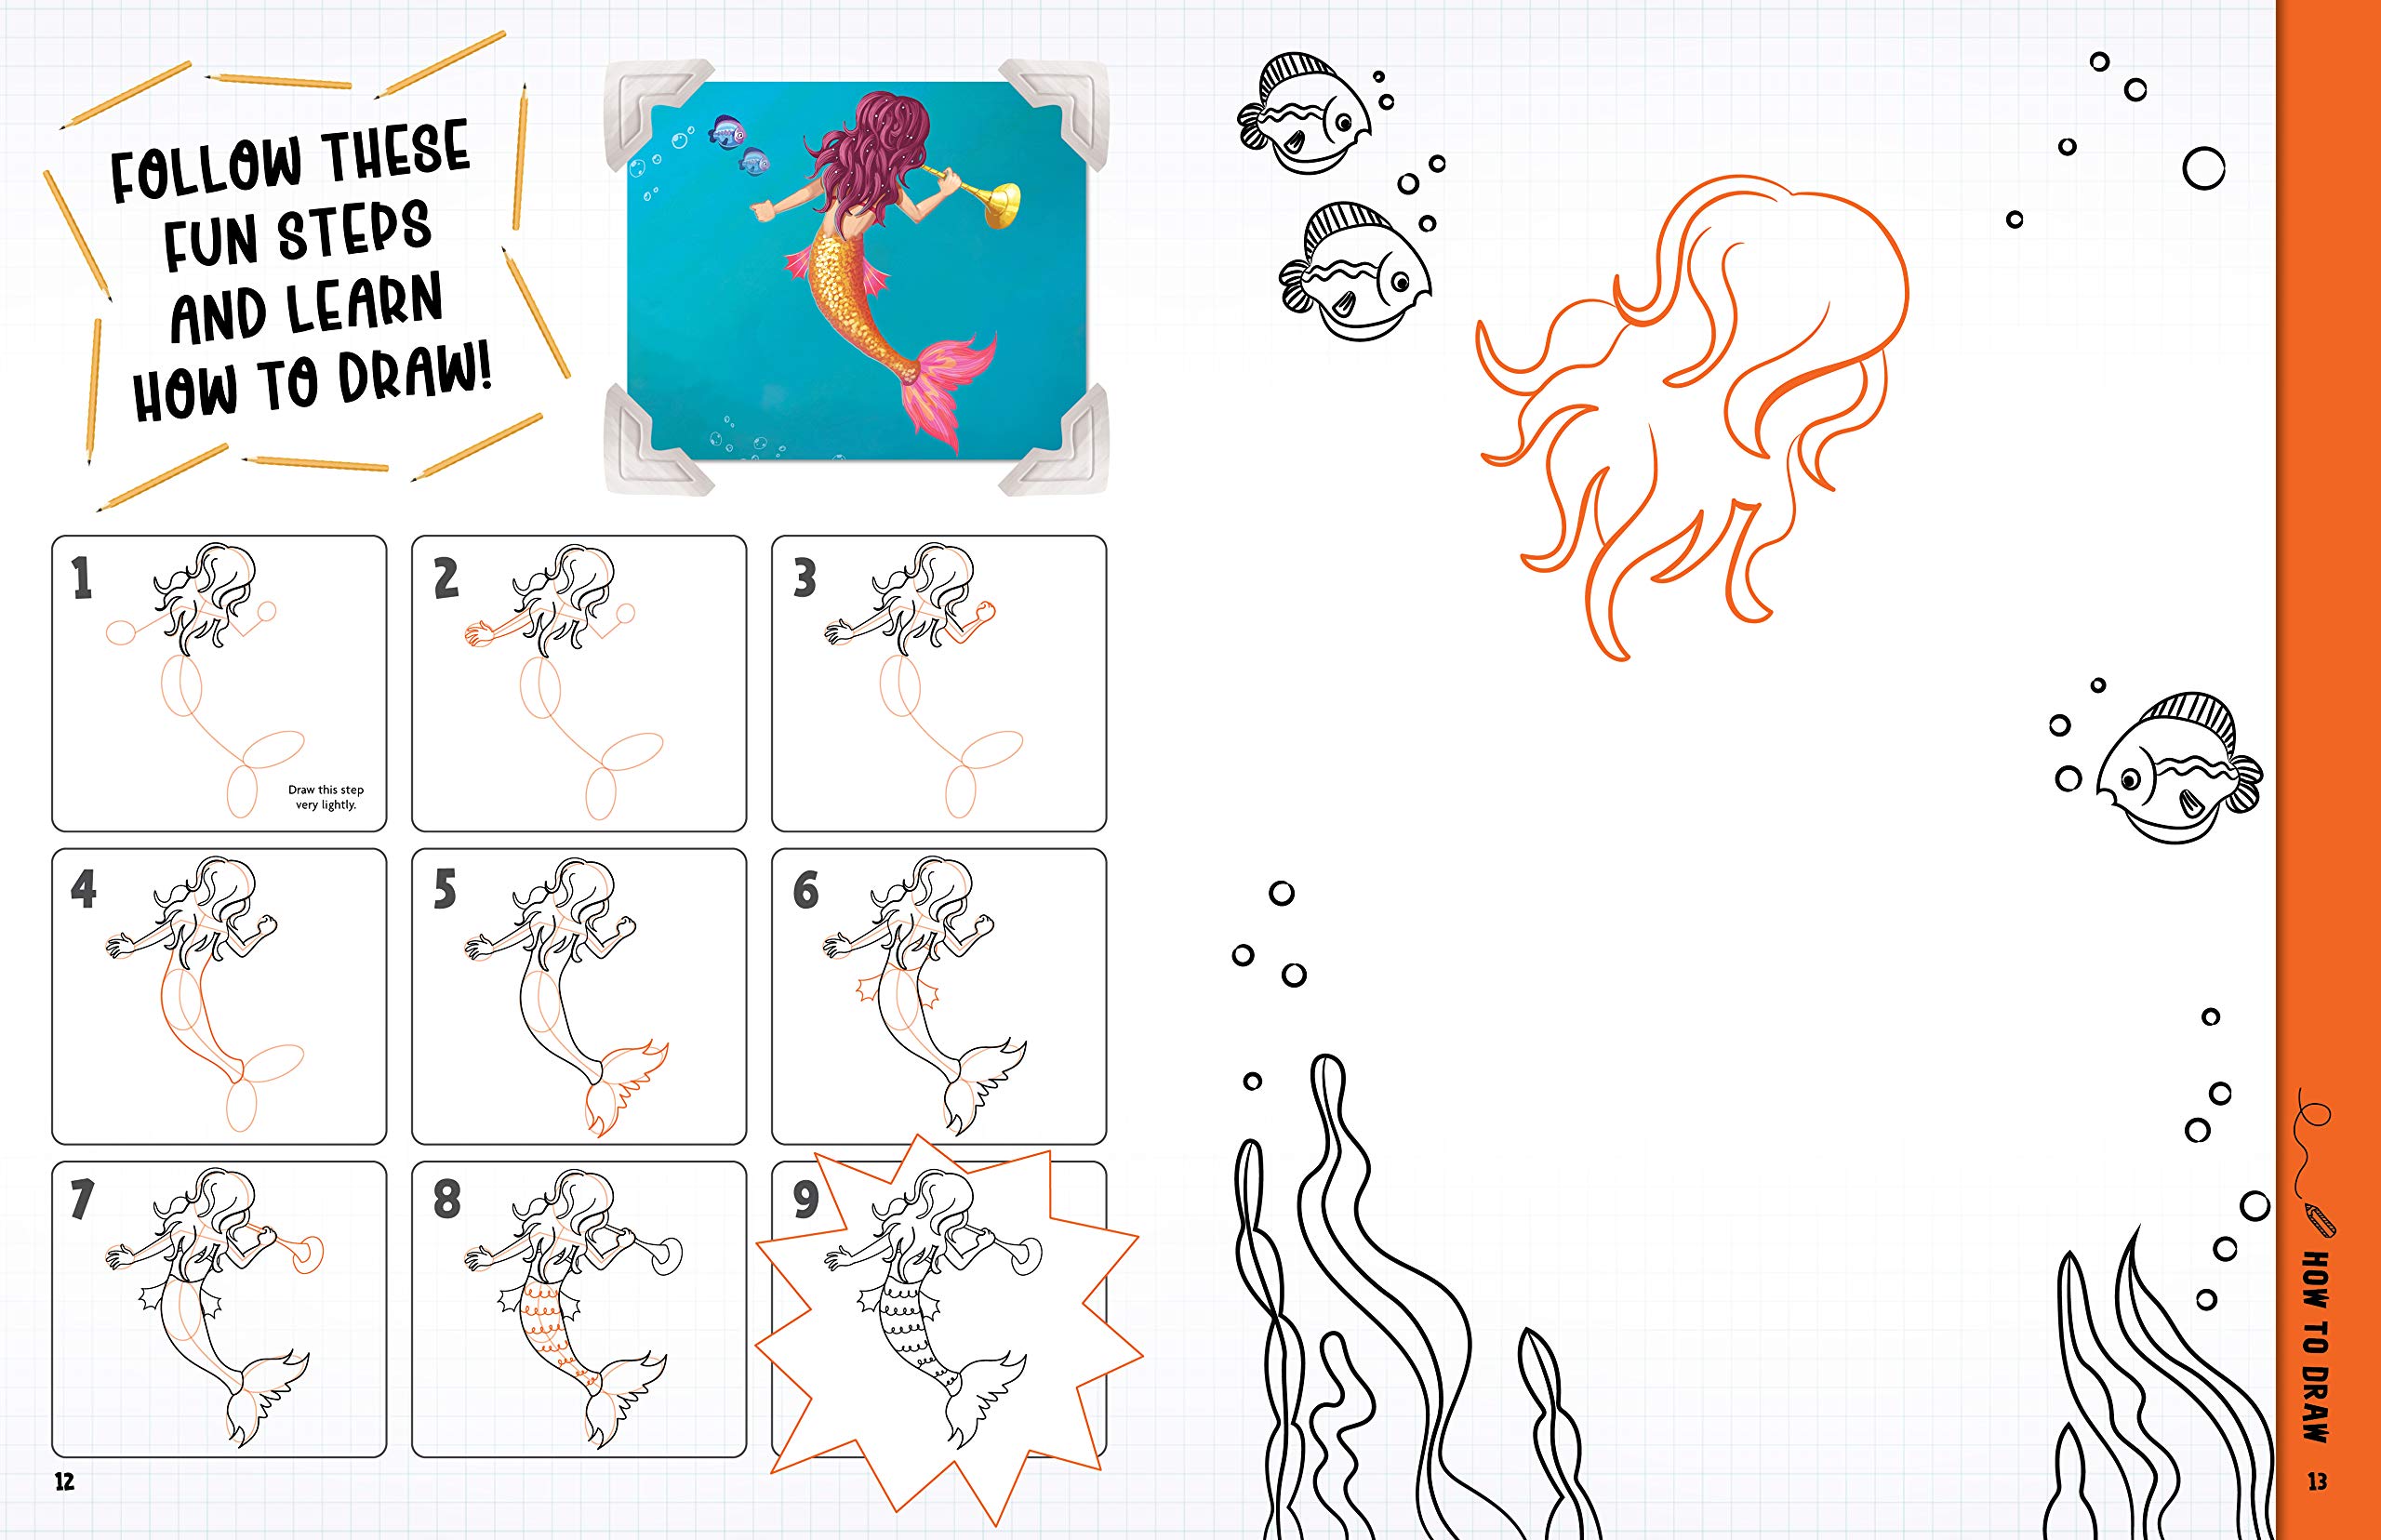 The How to Catch a Mermaid and Unicorn Activity Book for Kids: Who Can You Catch First? (Featuring hidden pictures, how-to-draw activities, coloring, dot-to-dots and more!)